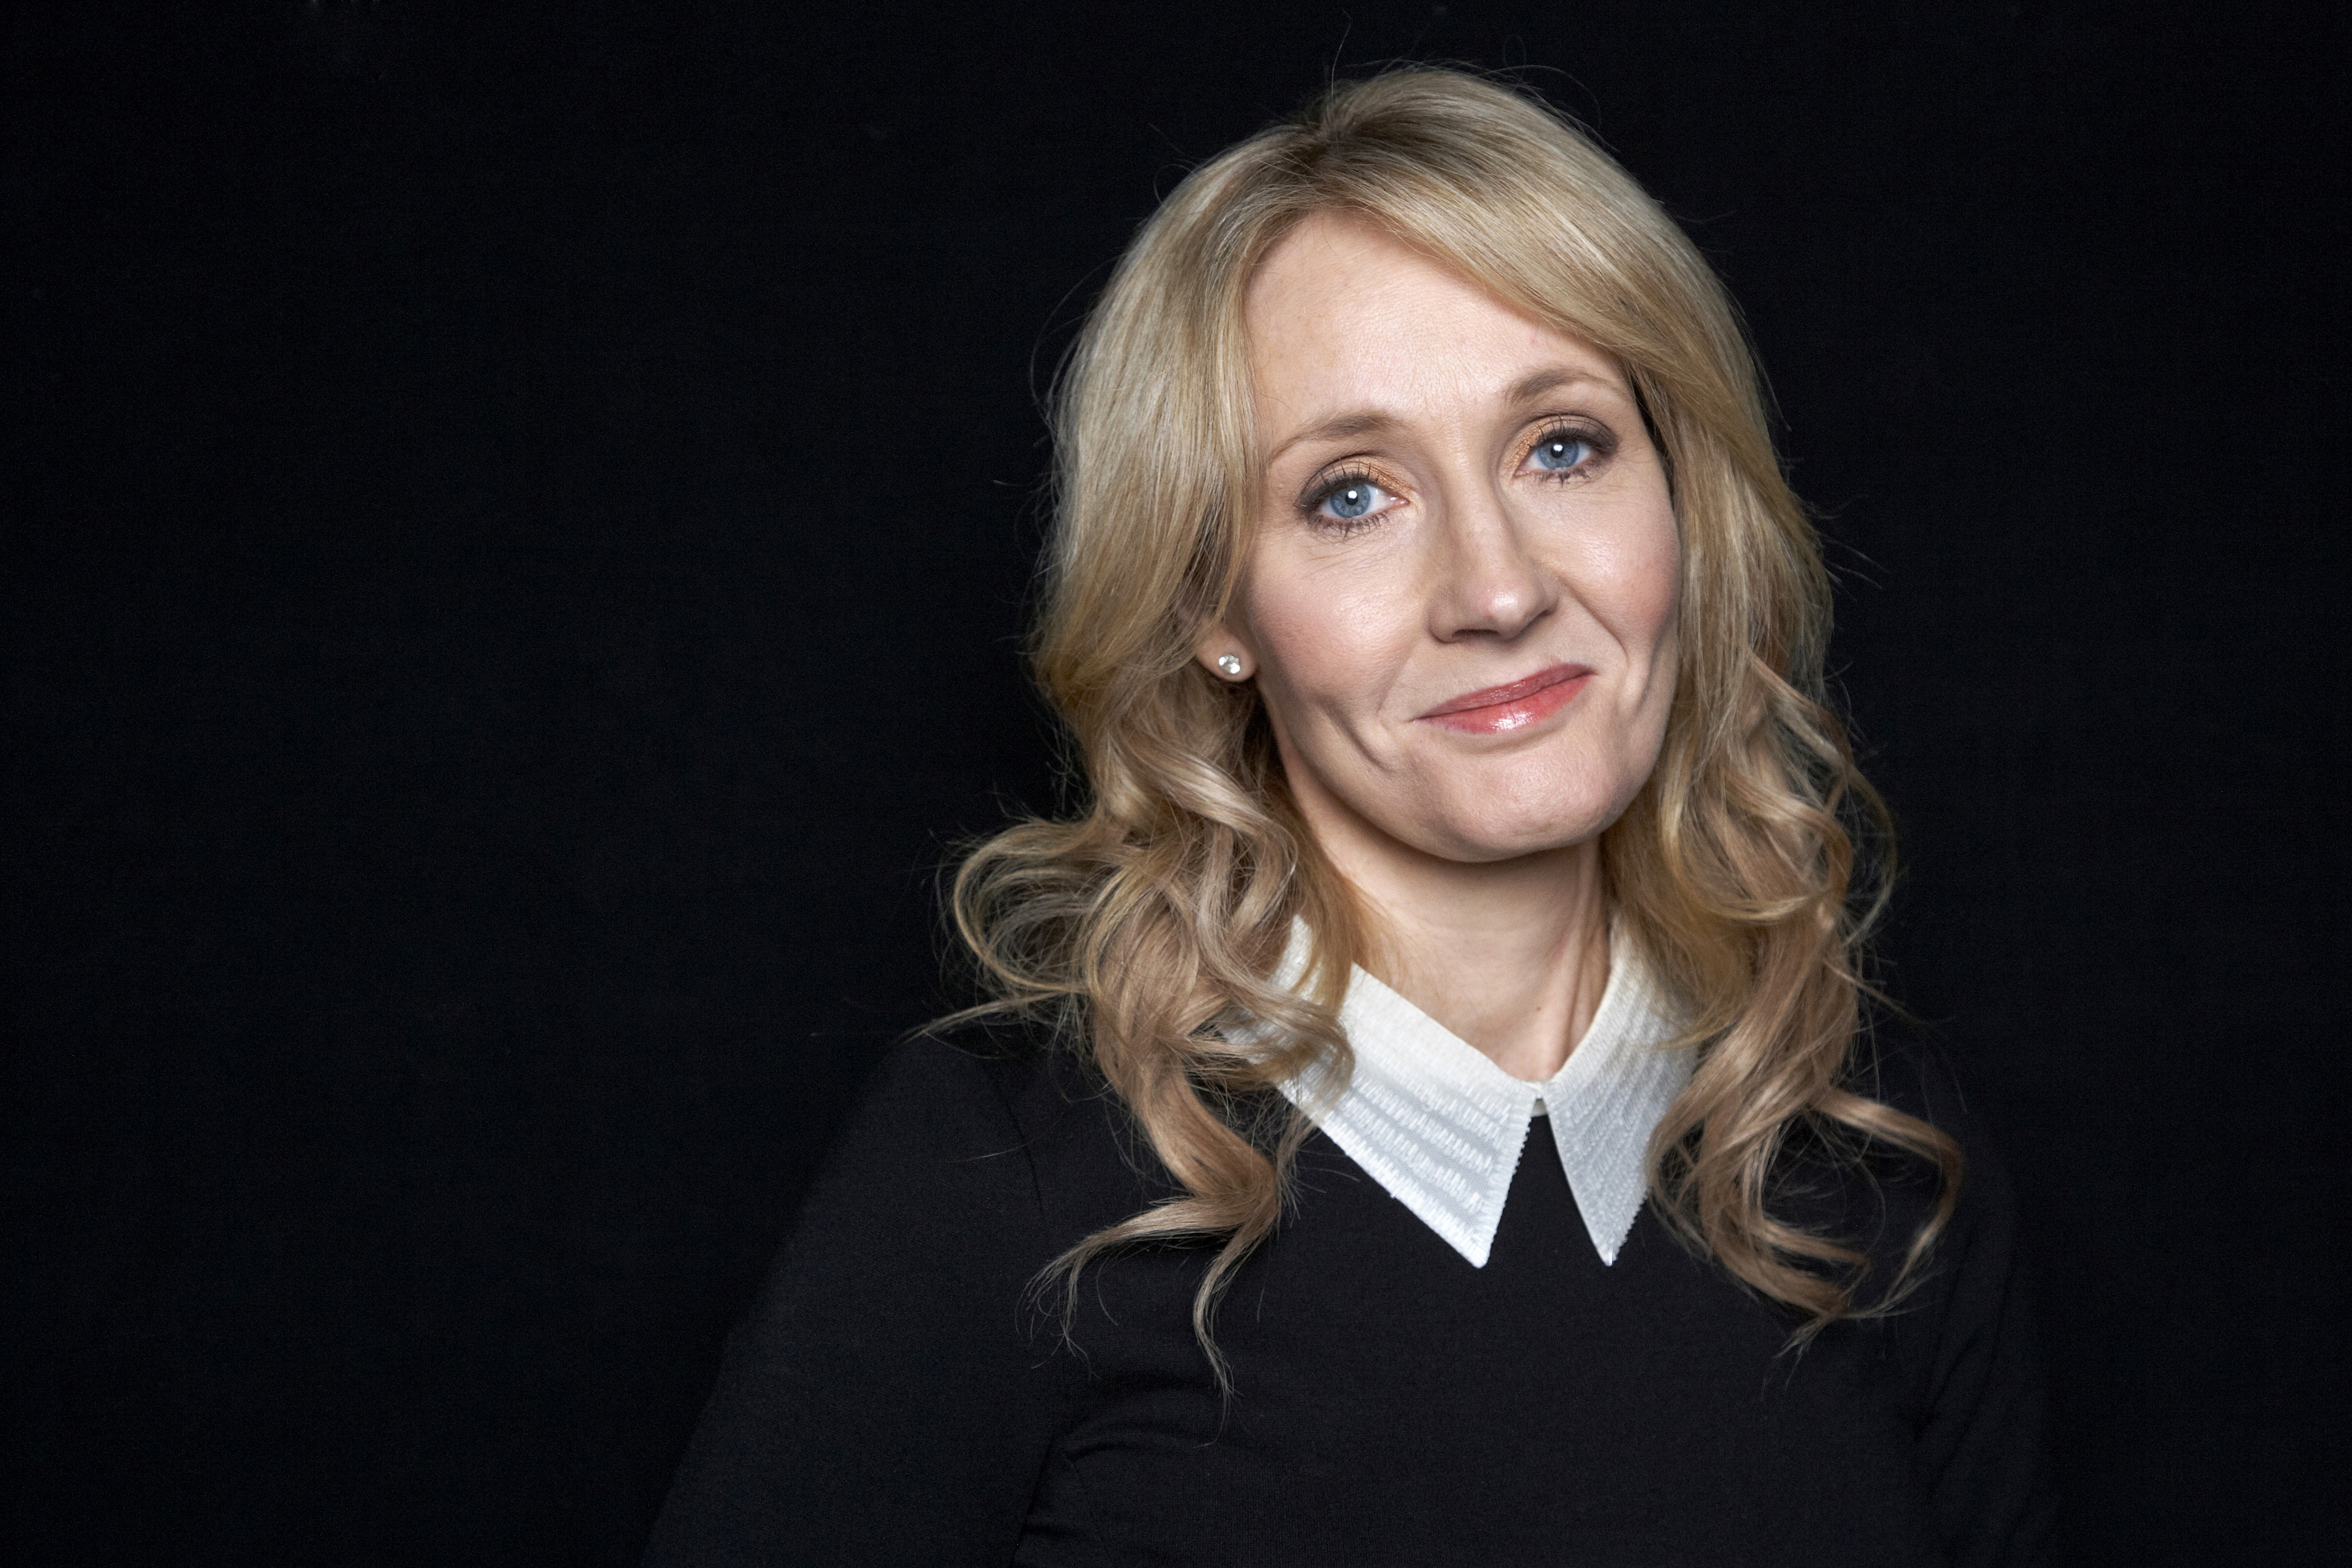 J.K. Rowling poses for a photo during an appearance at The David H. Koch Theater in New York on Oct. 16, 2012. (Dan Hallman—Invision/AP)